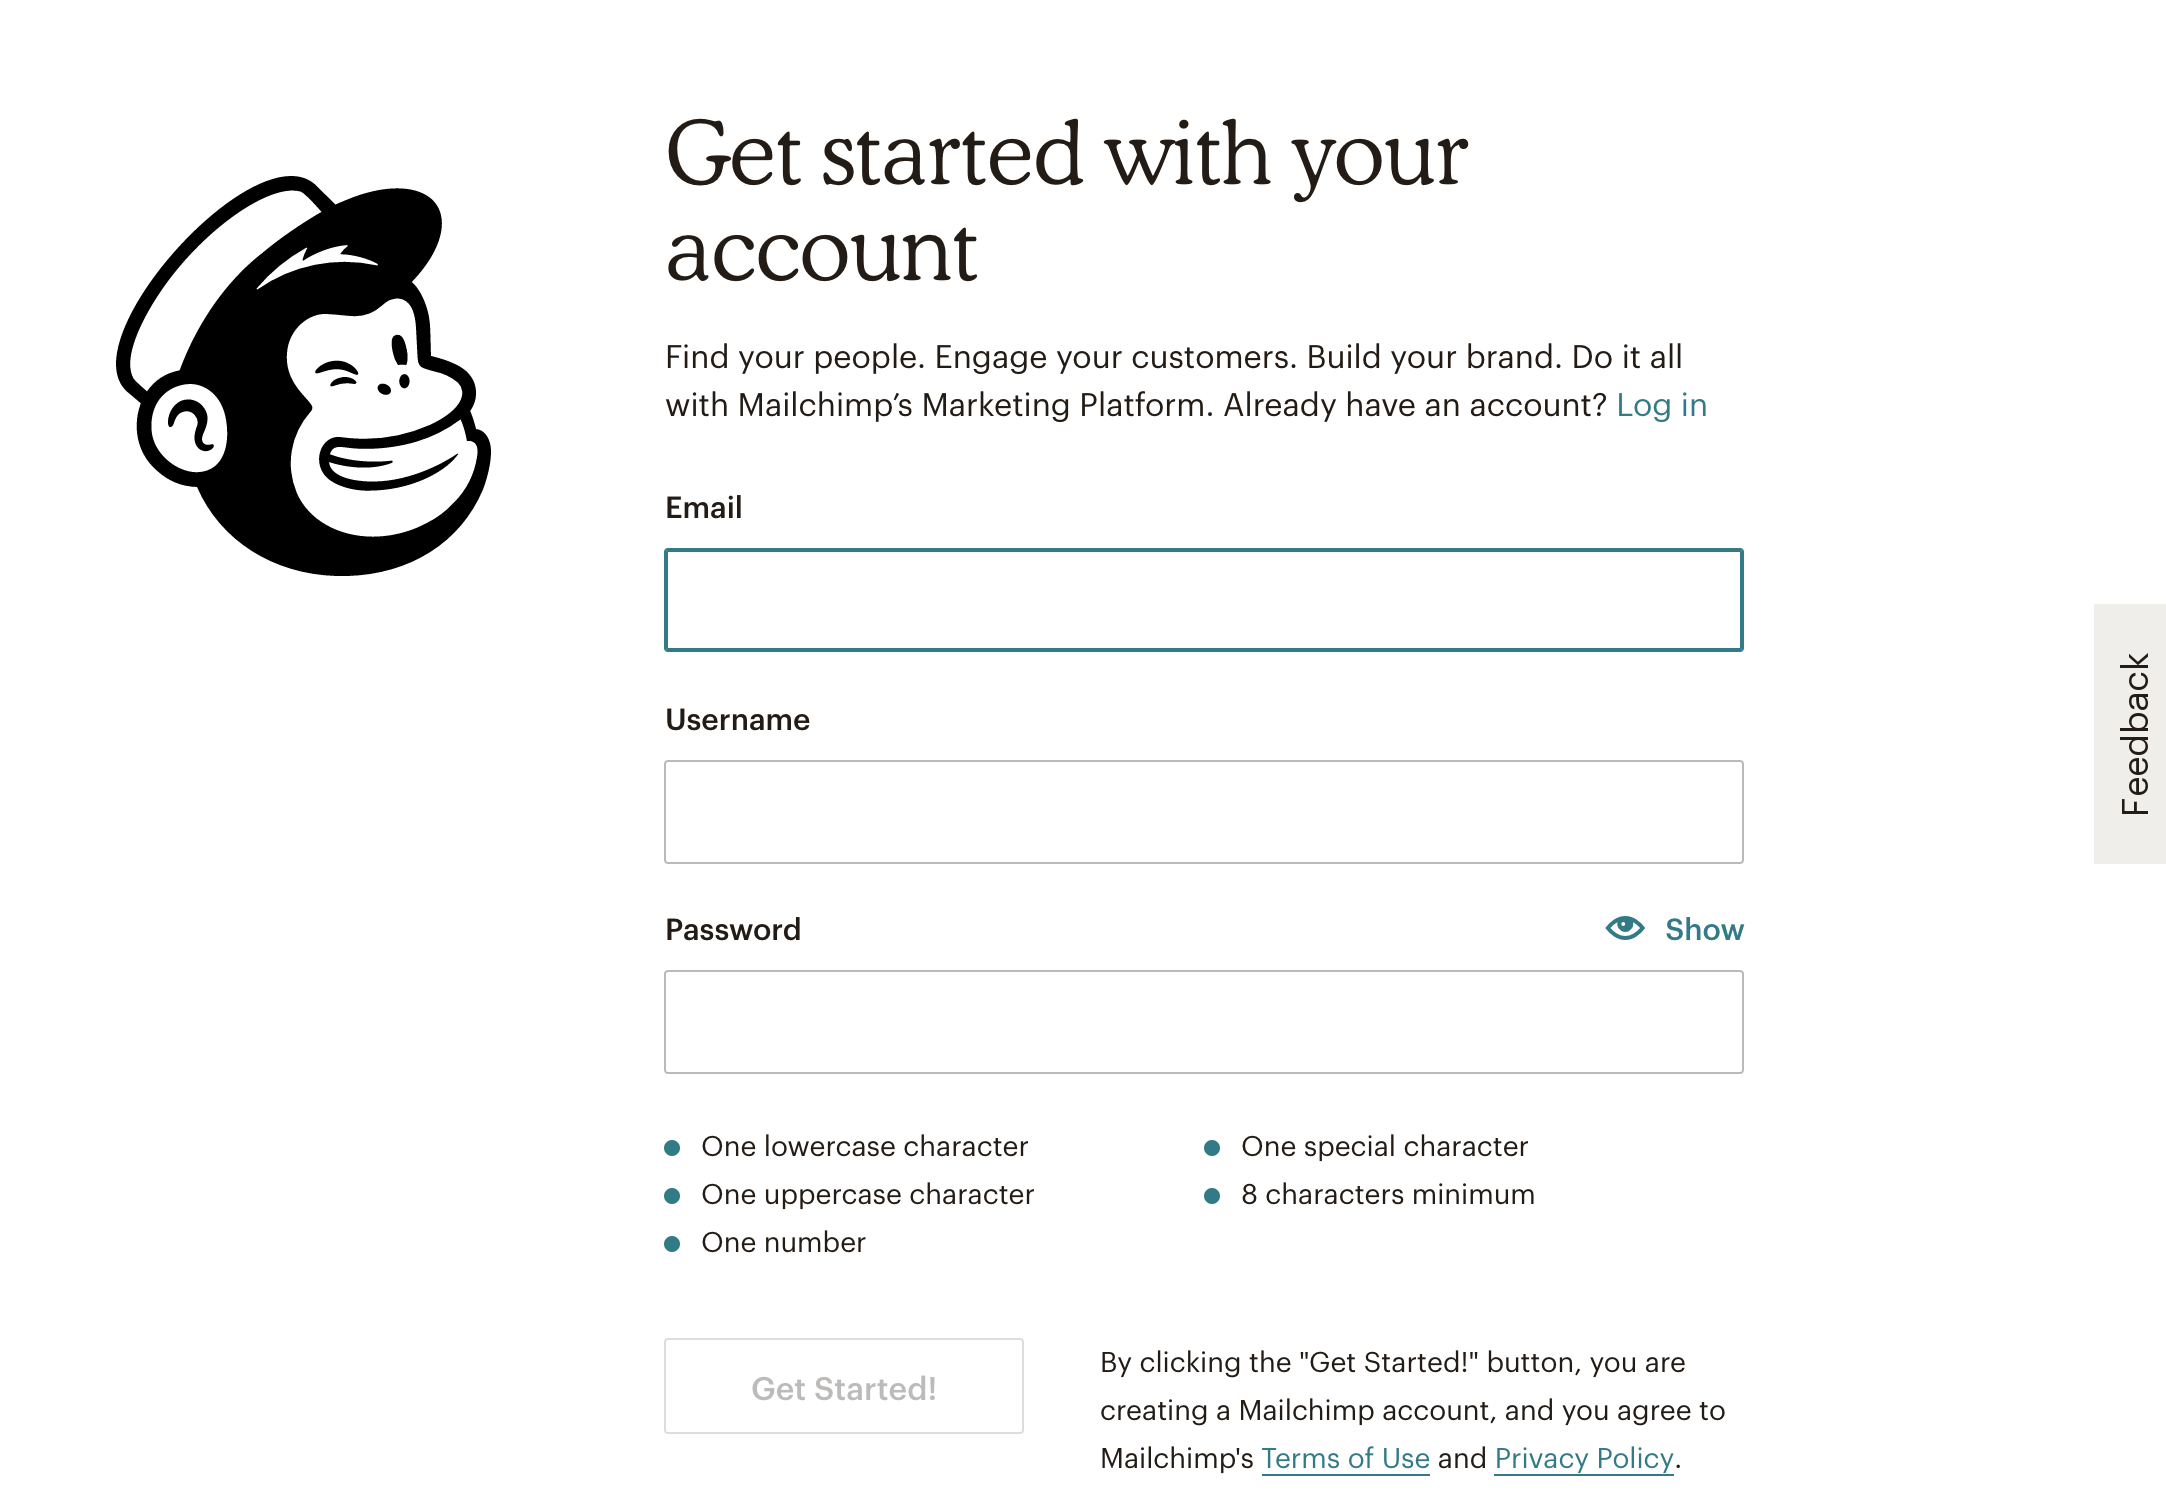 Another microcopy example: Mailchimp's Get Started page